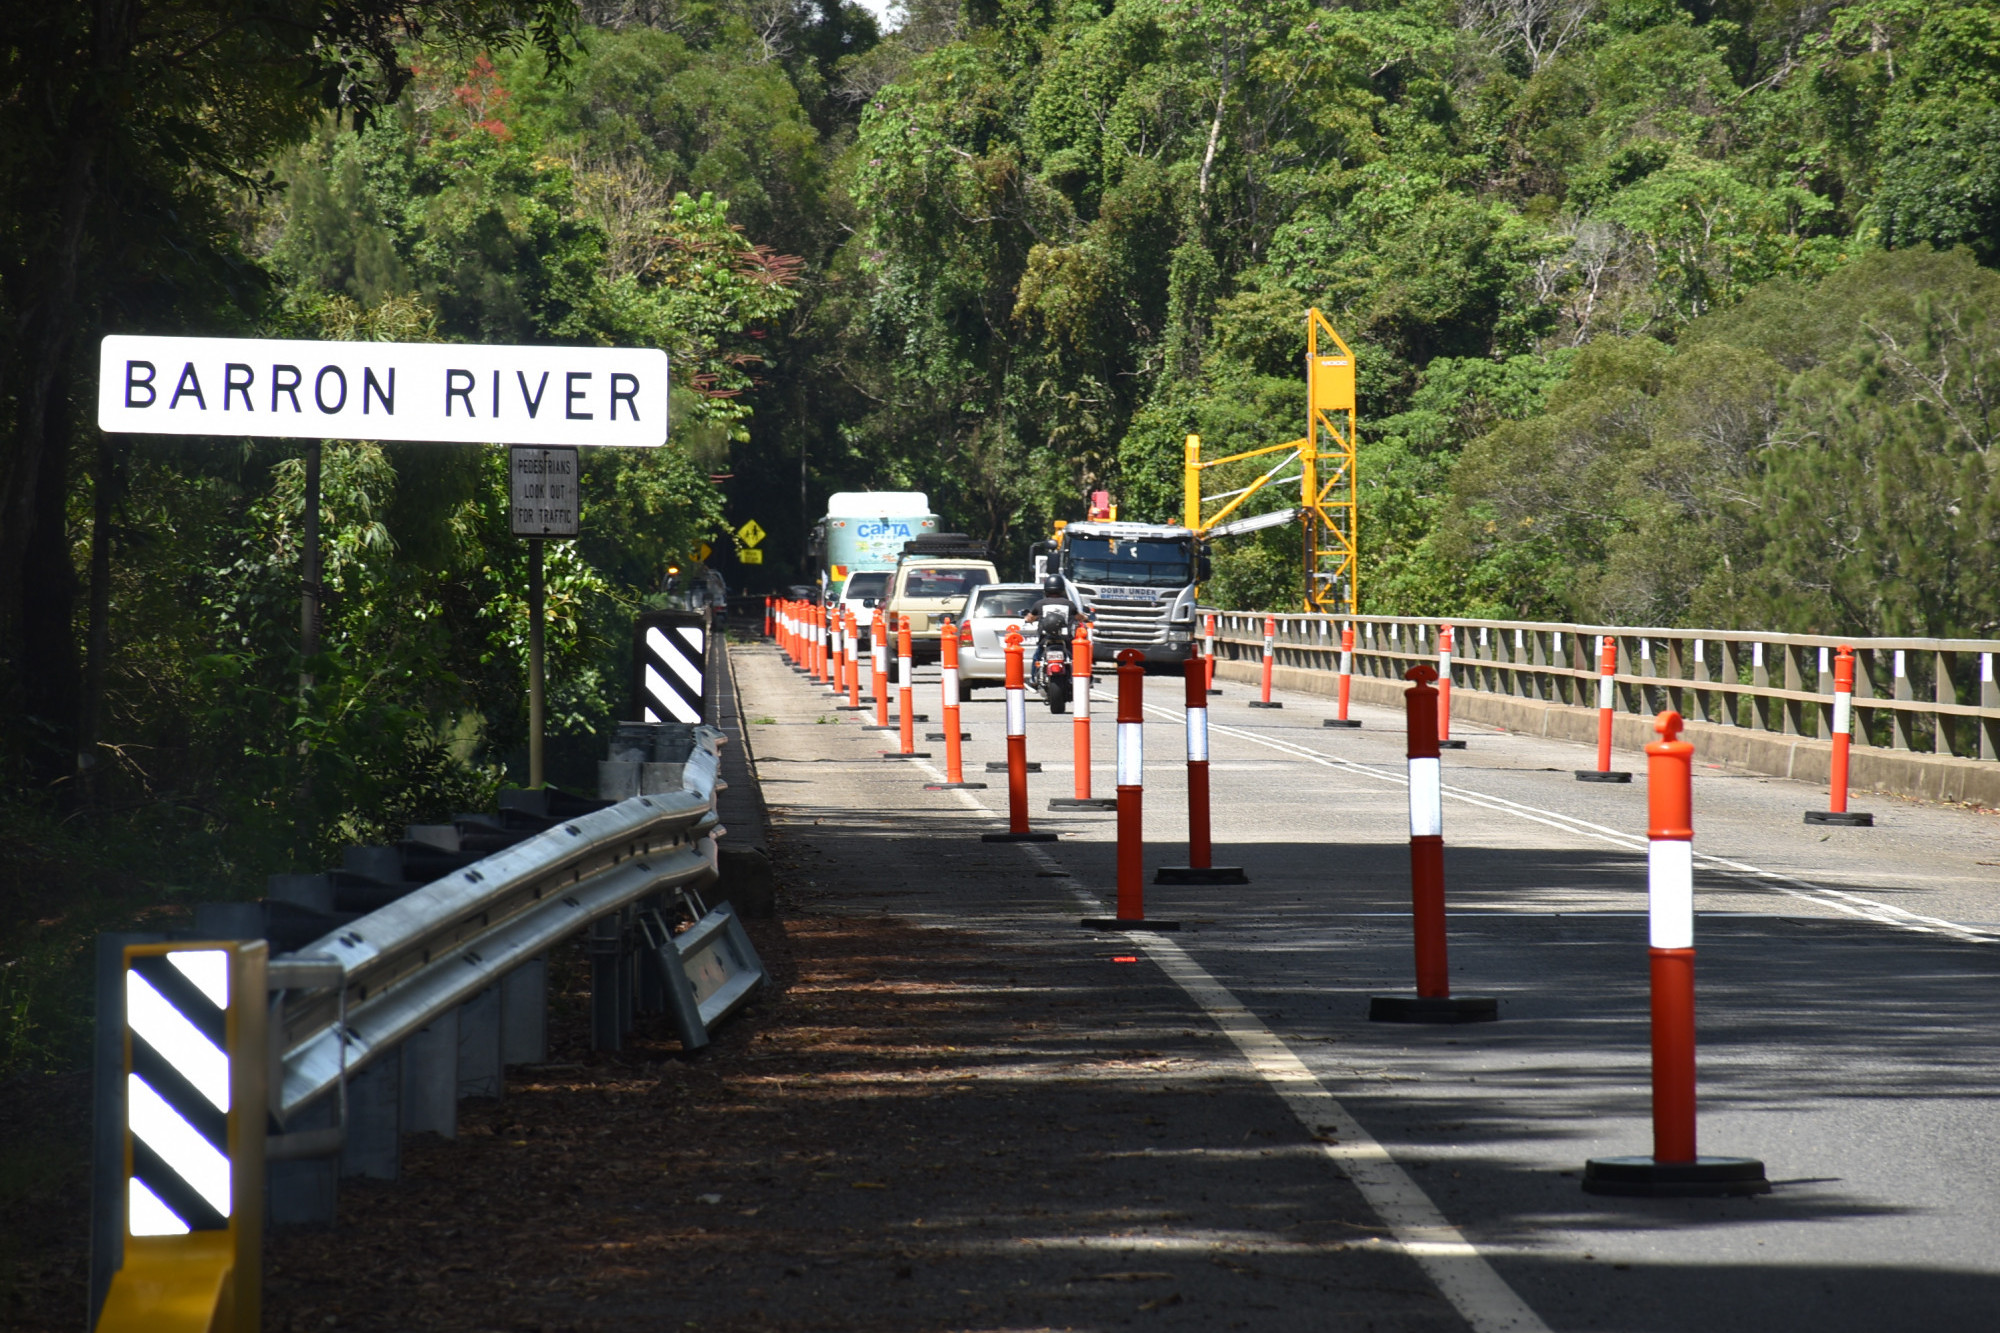 The Barron River Bridge which was been closed to one lane since November of last year.